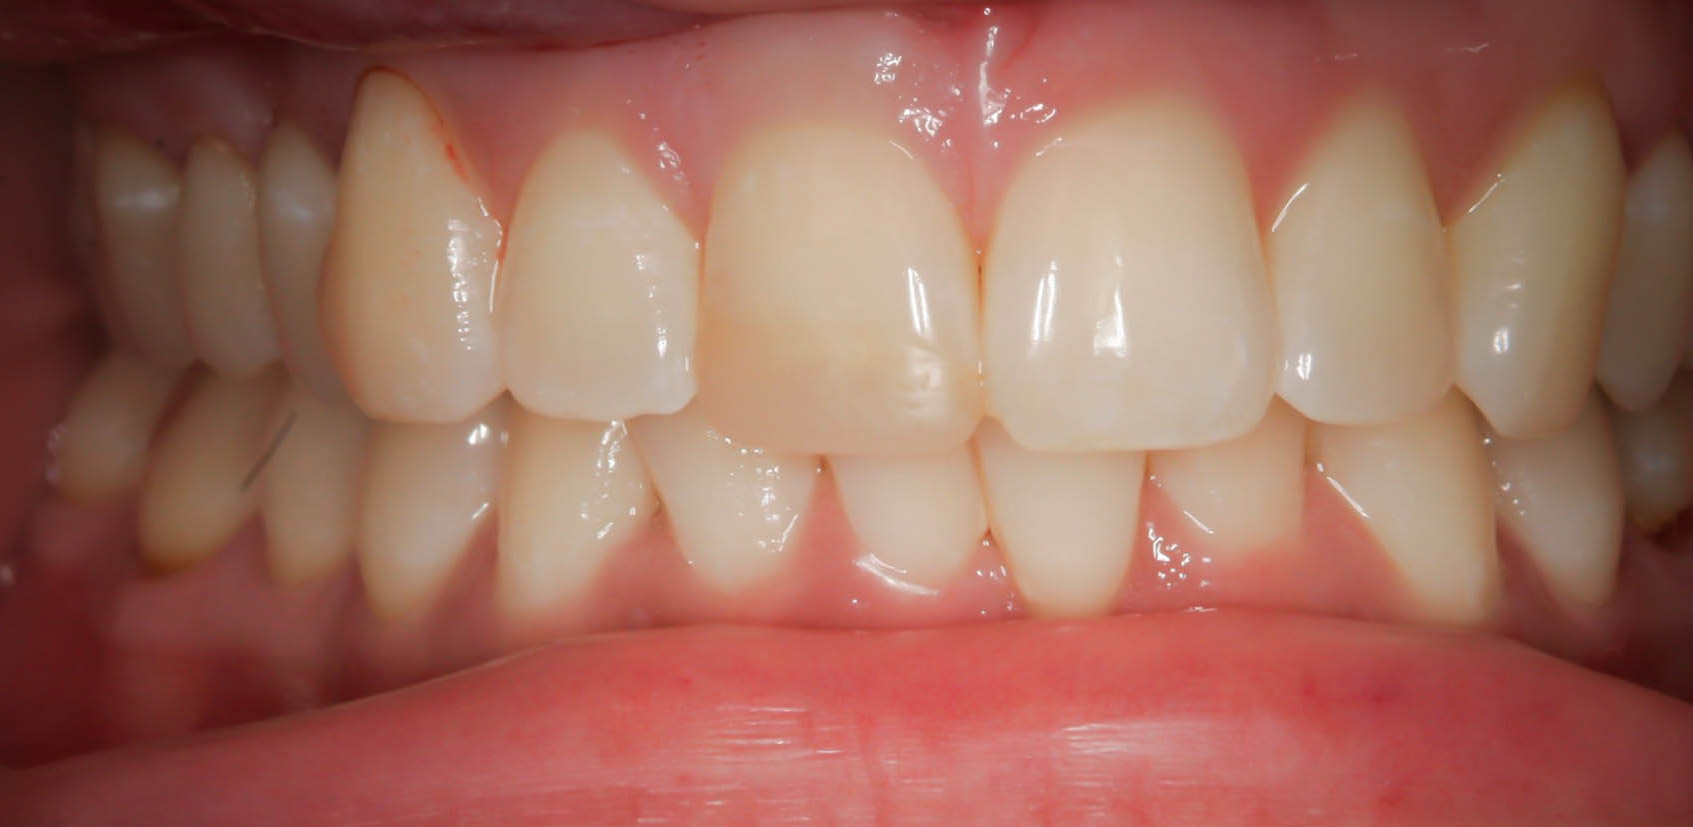 Single tooth crown to enhance esthetics -- the Before photo